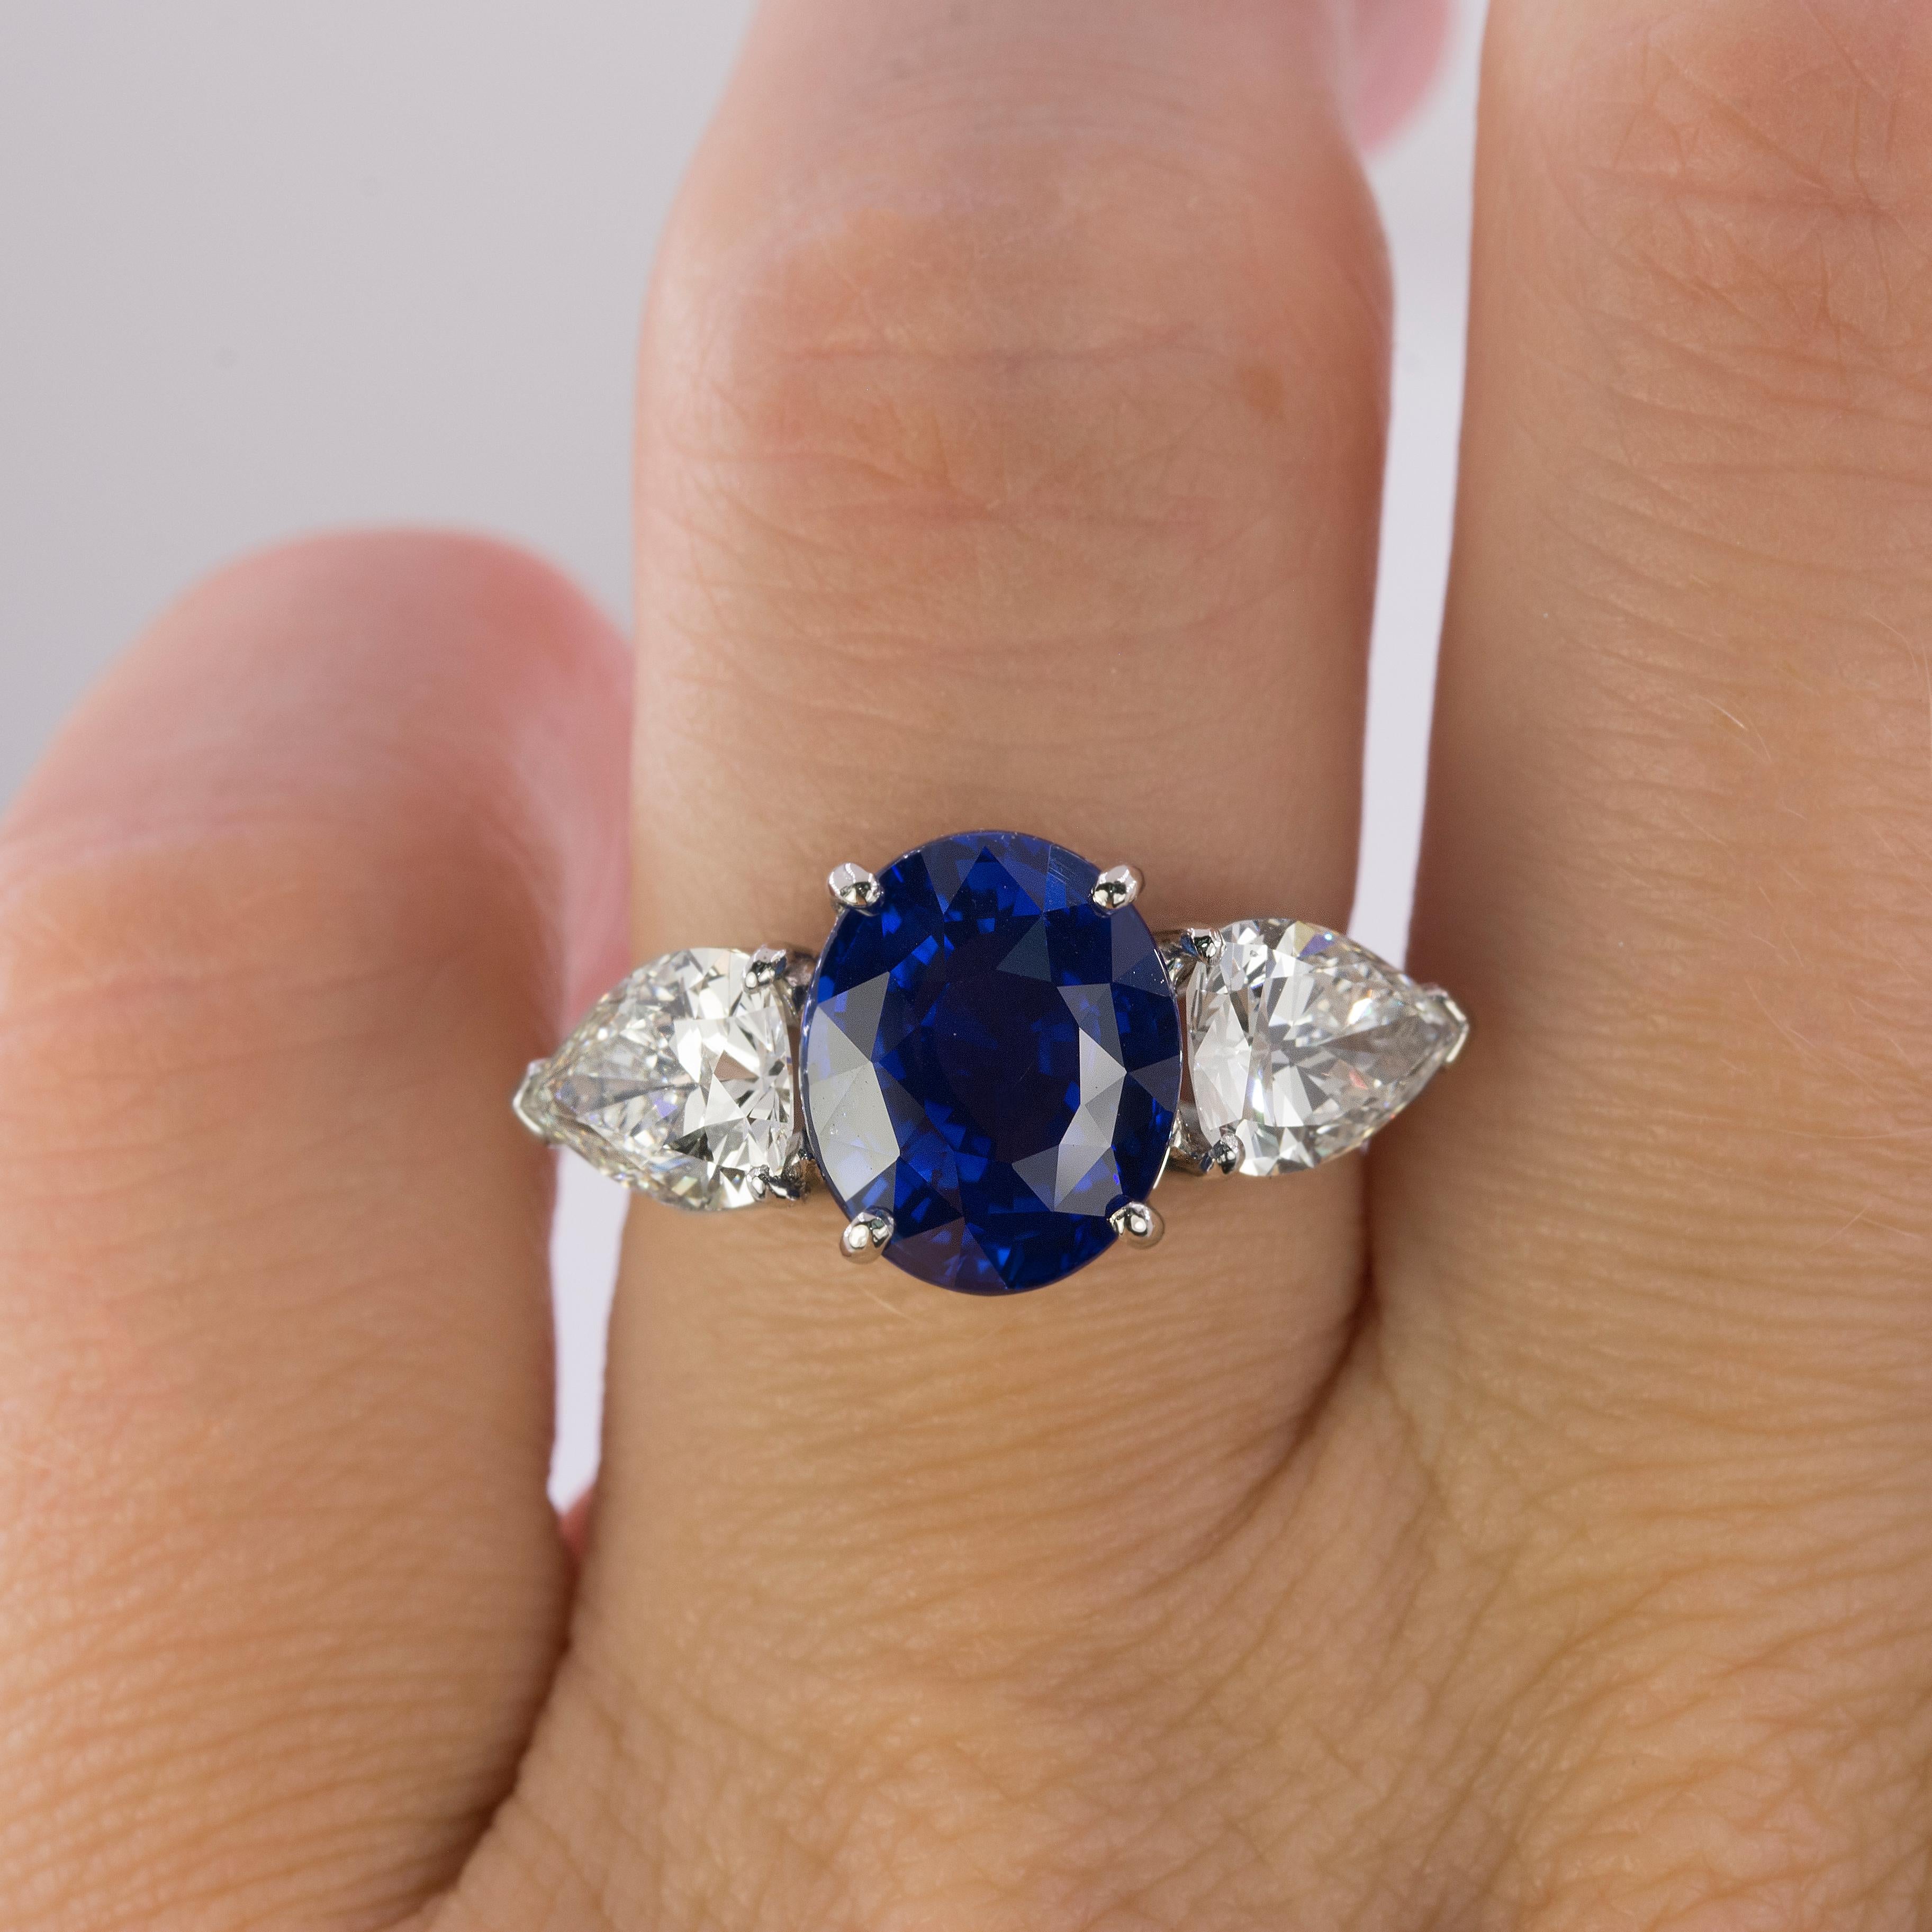 Magnificent GIA certified 5.51 carat Royal Blue Ceylon Sapphire set in hand fabricated platinum ring with two pear shape diamonds weighing 2.51 carats total weight.